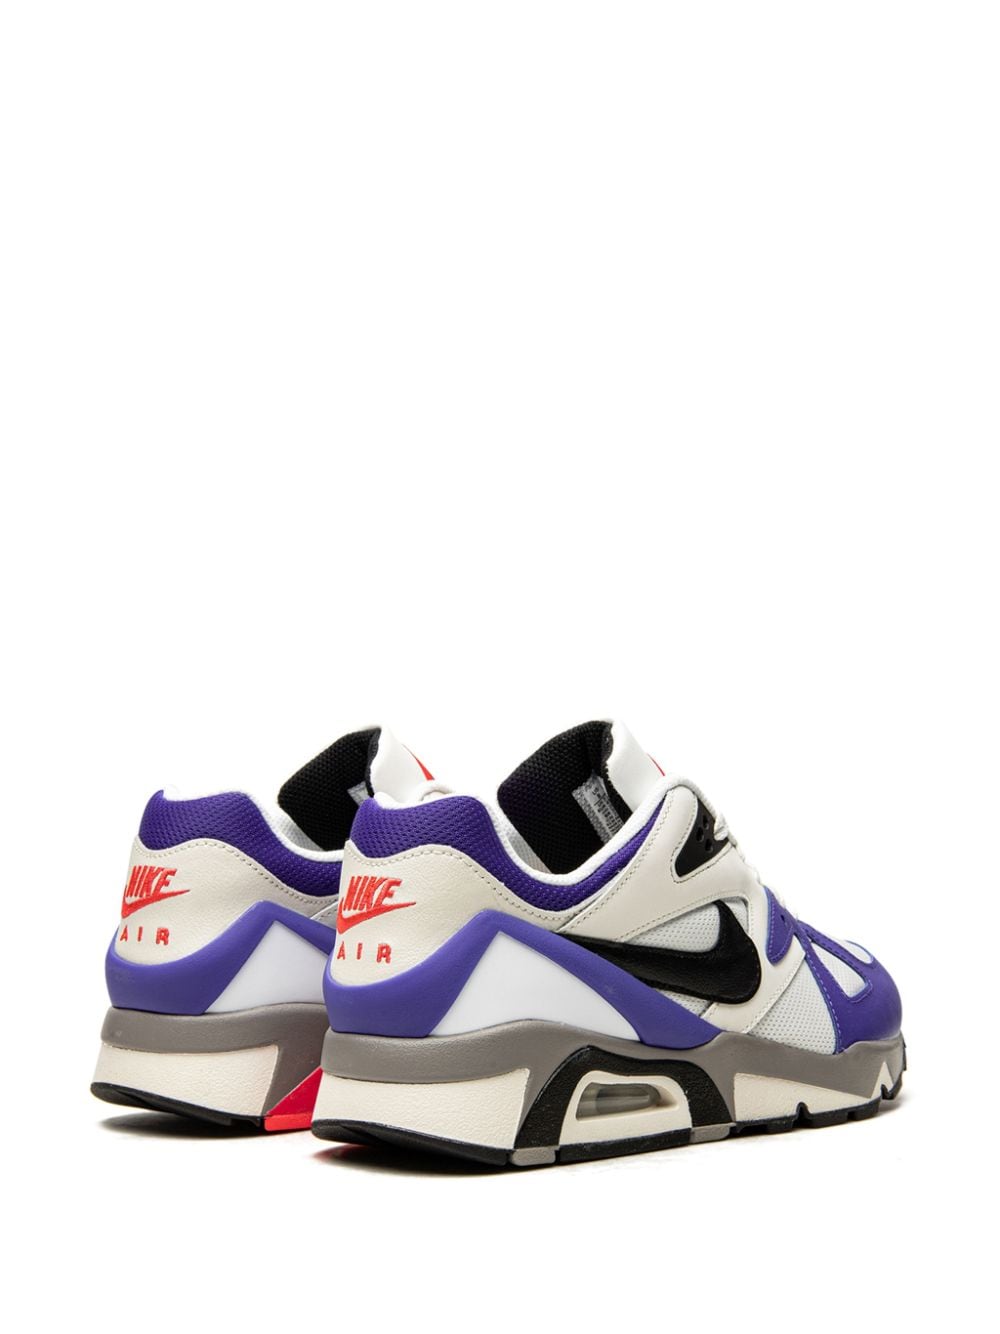 Nike Air Structure Triax 91 Violet" Sneakers -